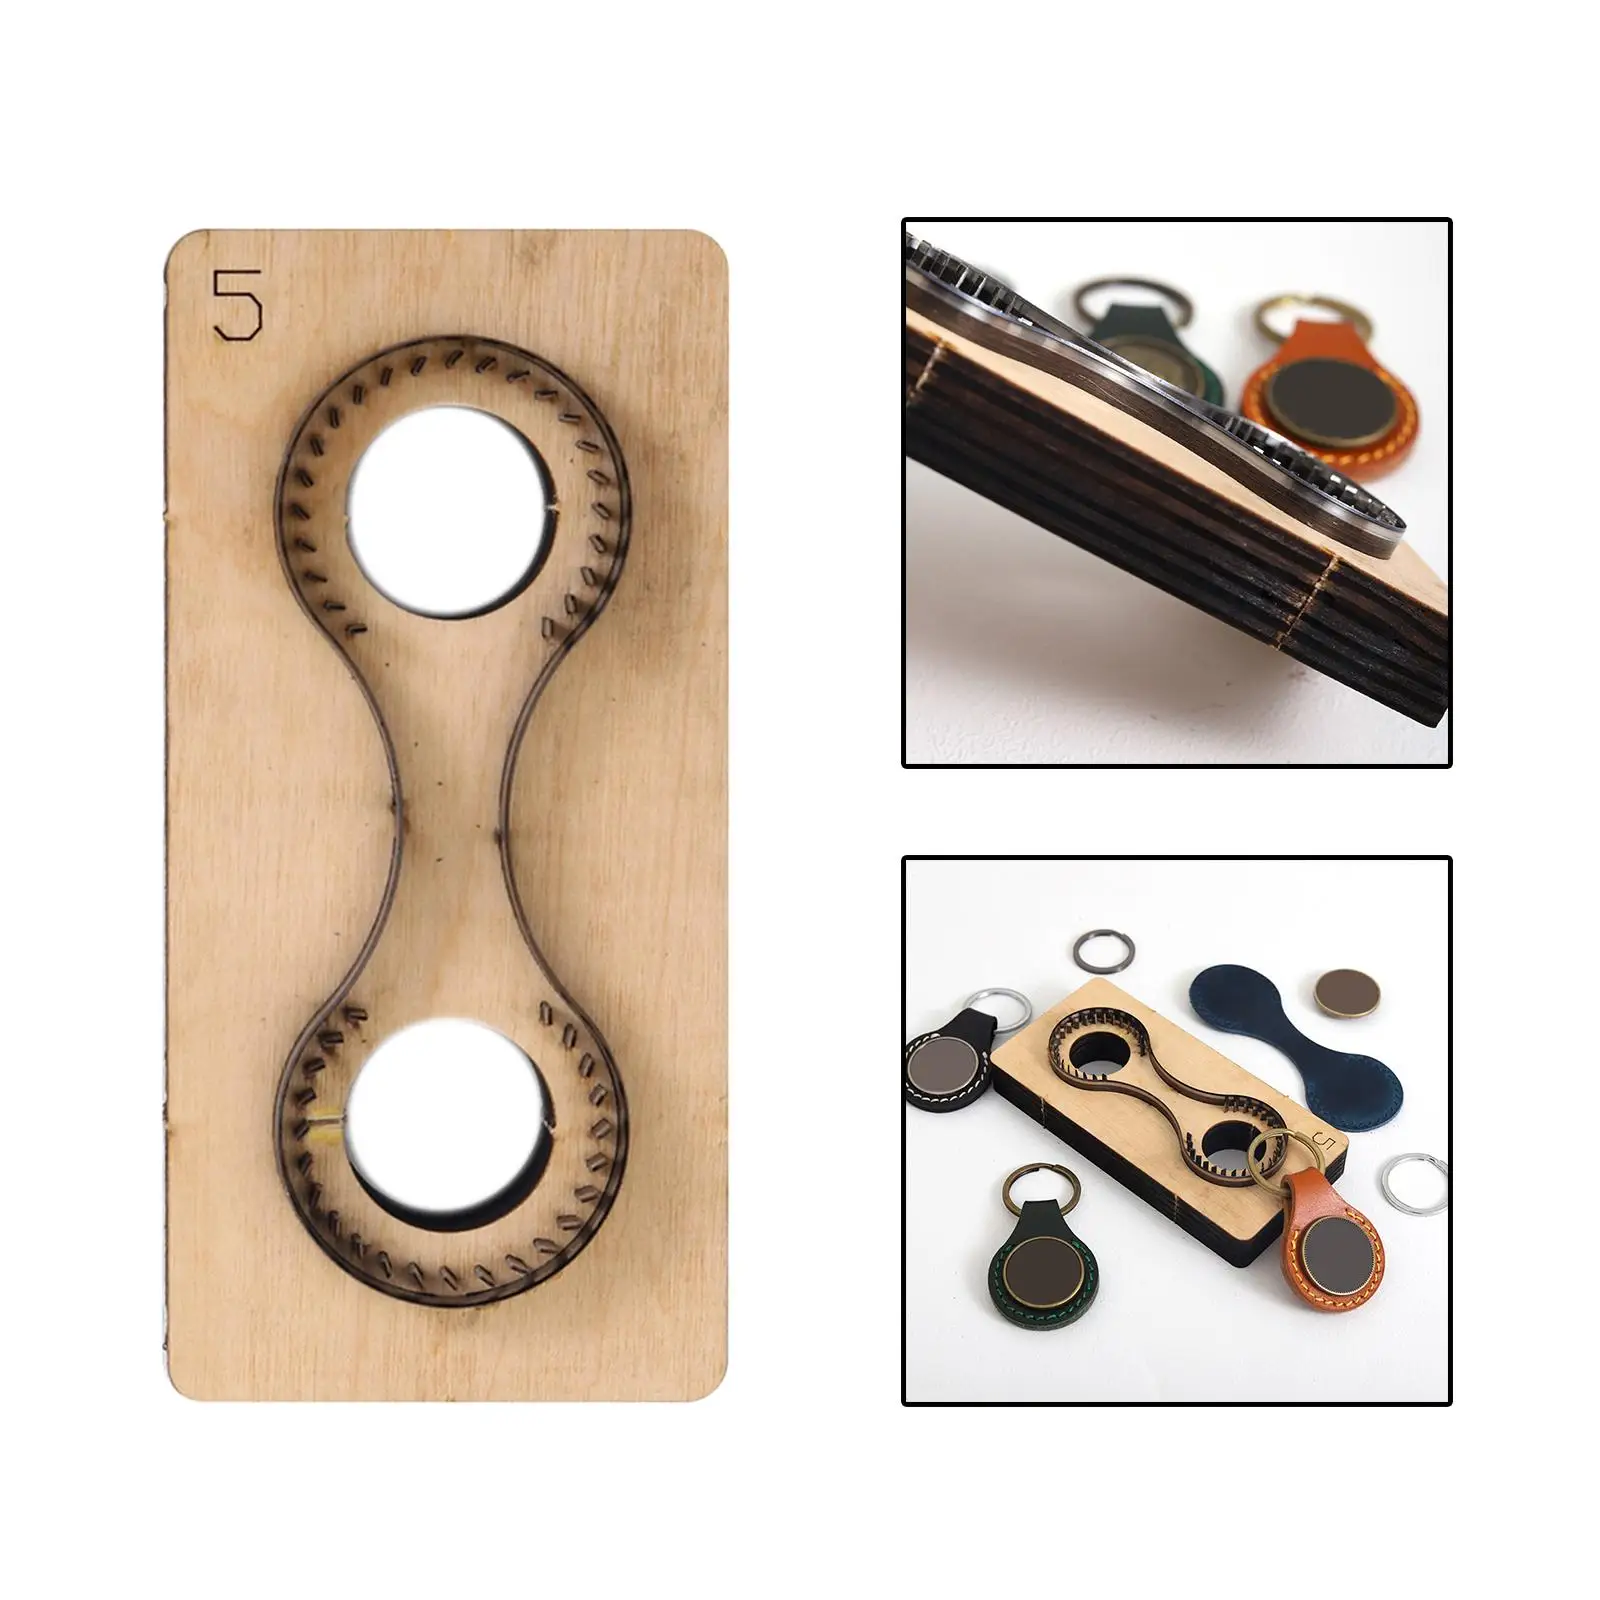 Metal Cutting Dies Key Chain 1Pcs Tool Set Easy to Use Durable Craft Reusable DIY Template Blade Wooden Cutter for Keychain